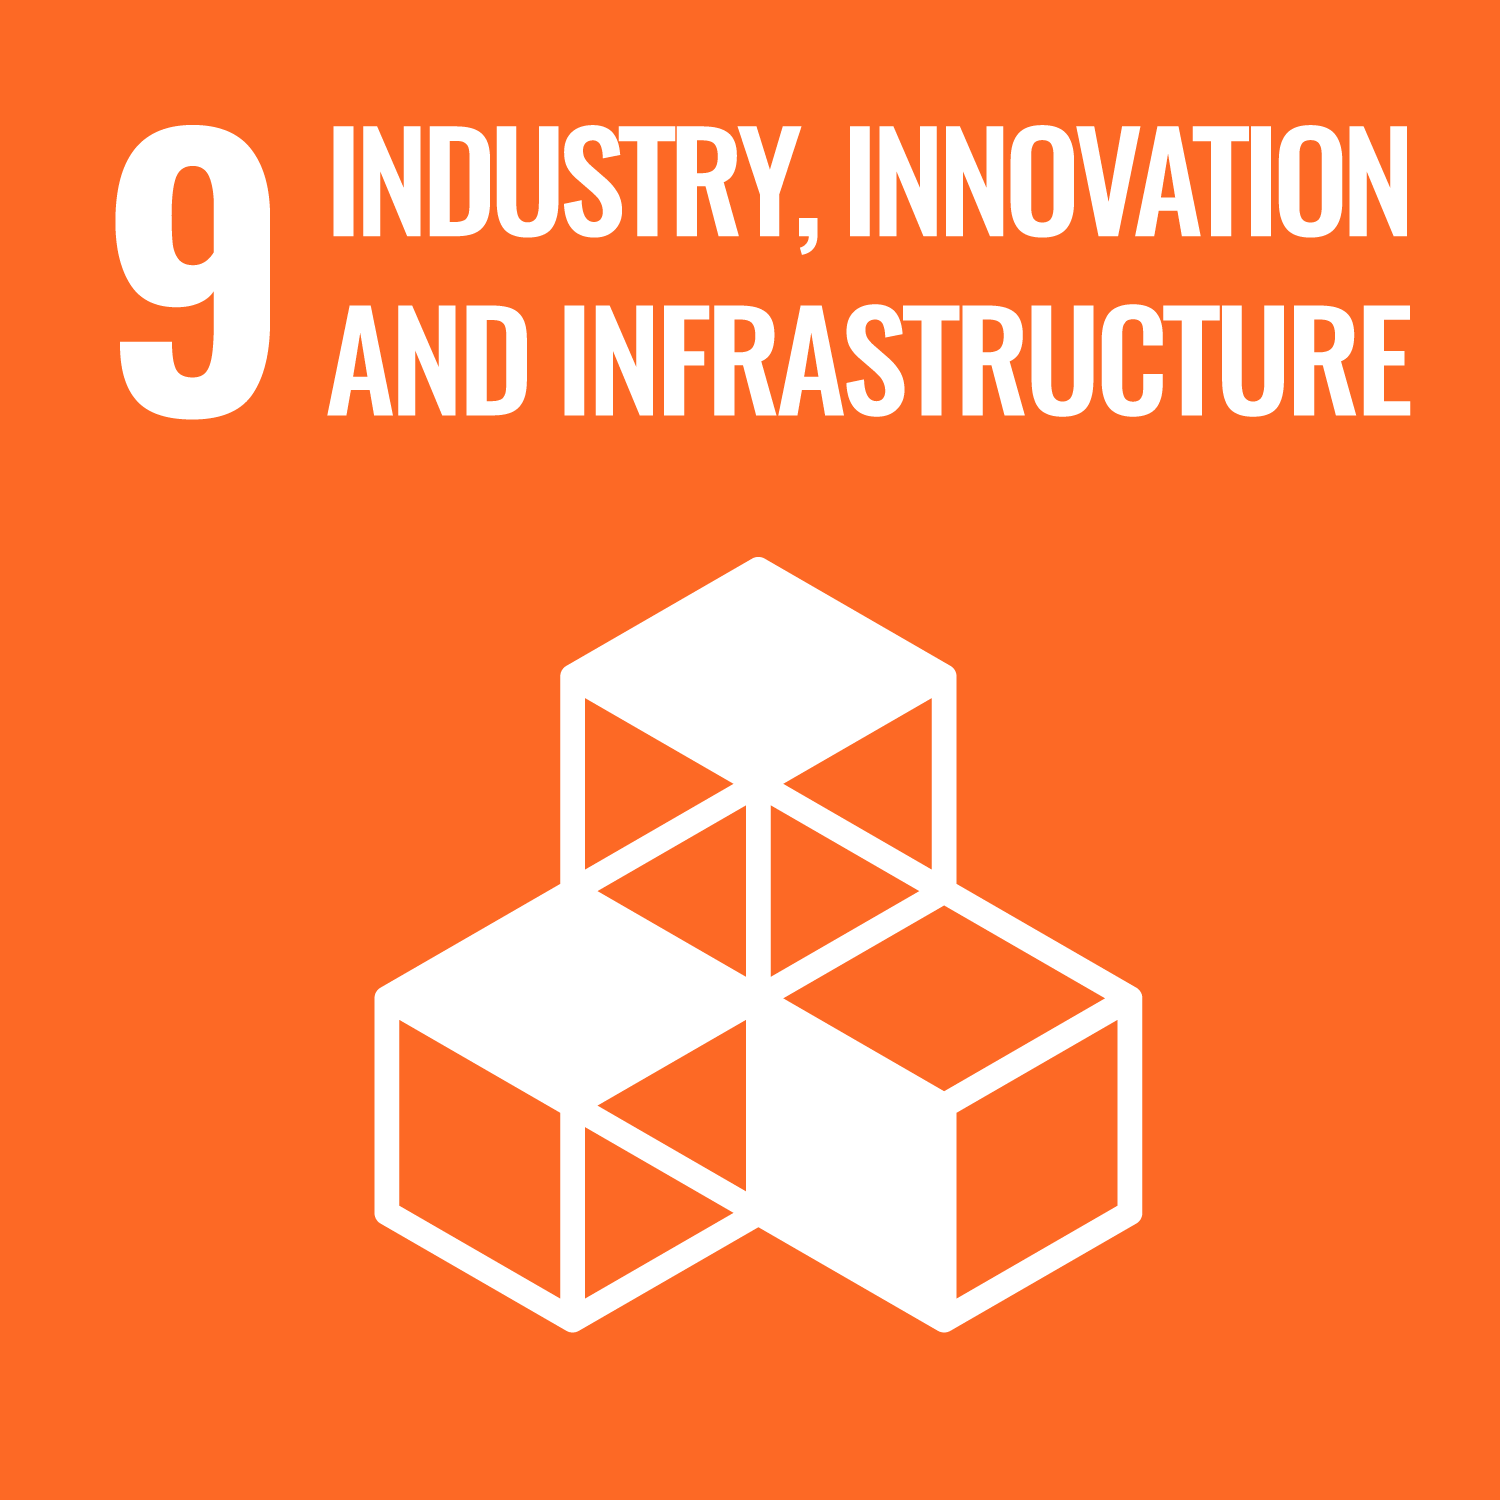 ［Goal 9］ Industry, Innovation and Infrastructure